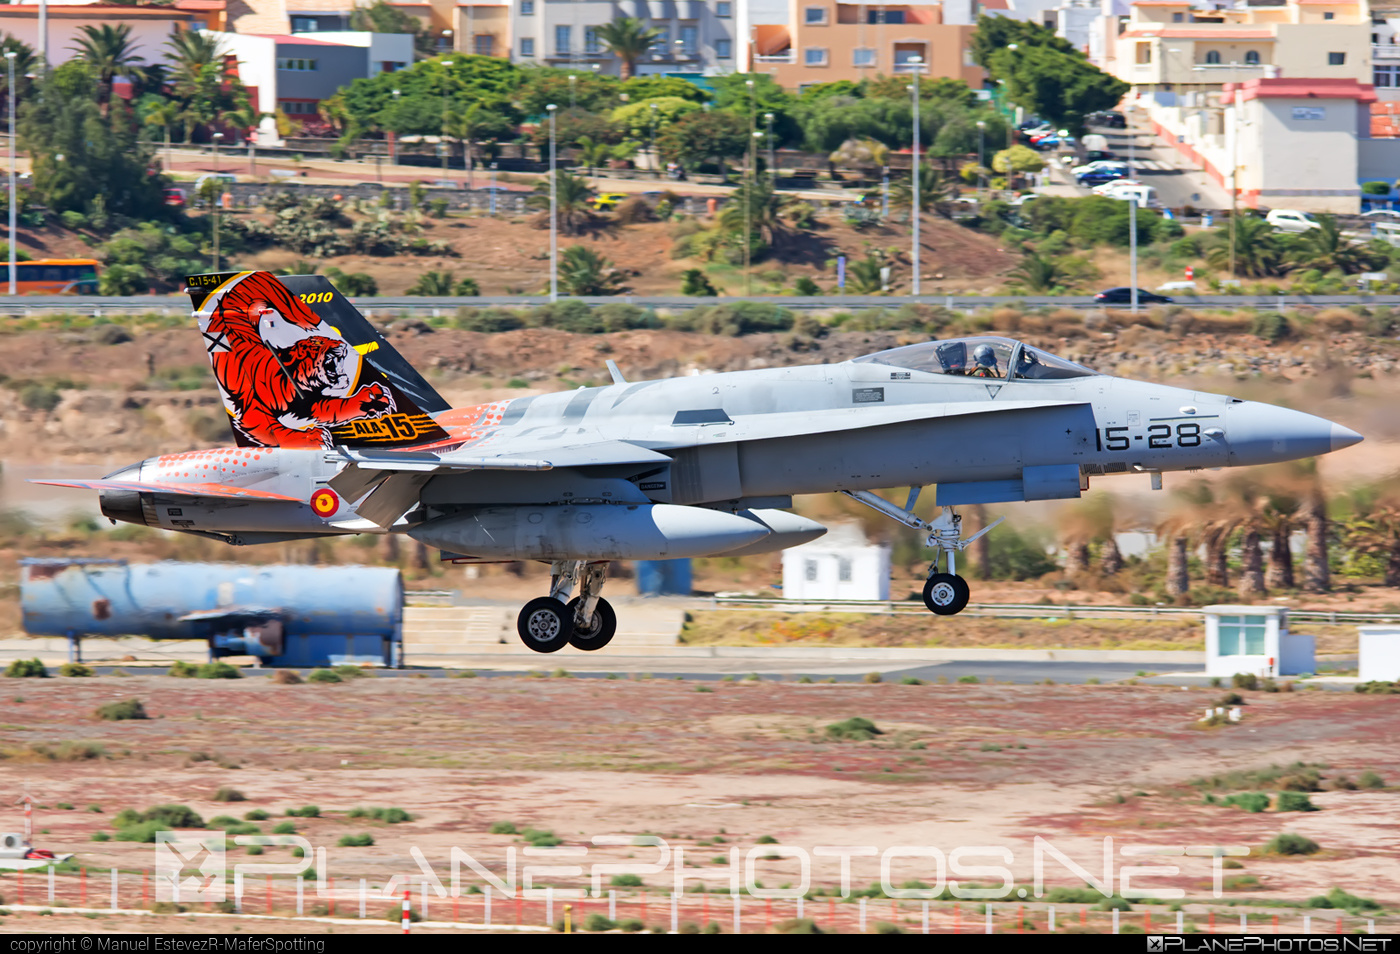 McDonnell Douglas EF-18M Hornet - C.15-41 operated by Ejército del Aire (Spanish Air Force) #ef18m #ejercitoDelAire #f18 #f18hornet #mcDonnellDouglas #spanishAirForce